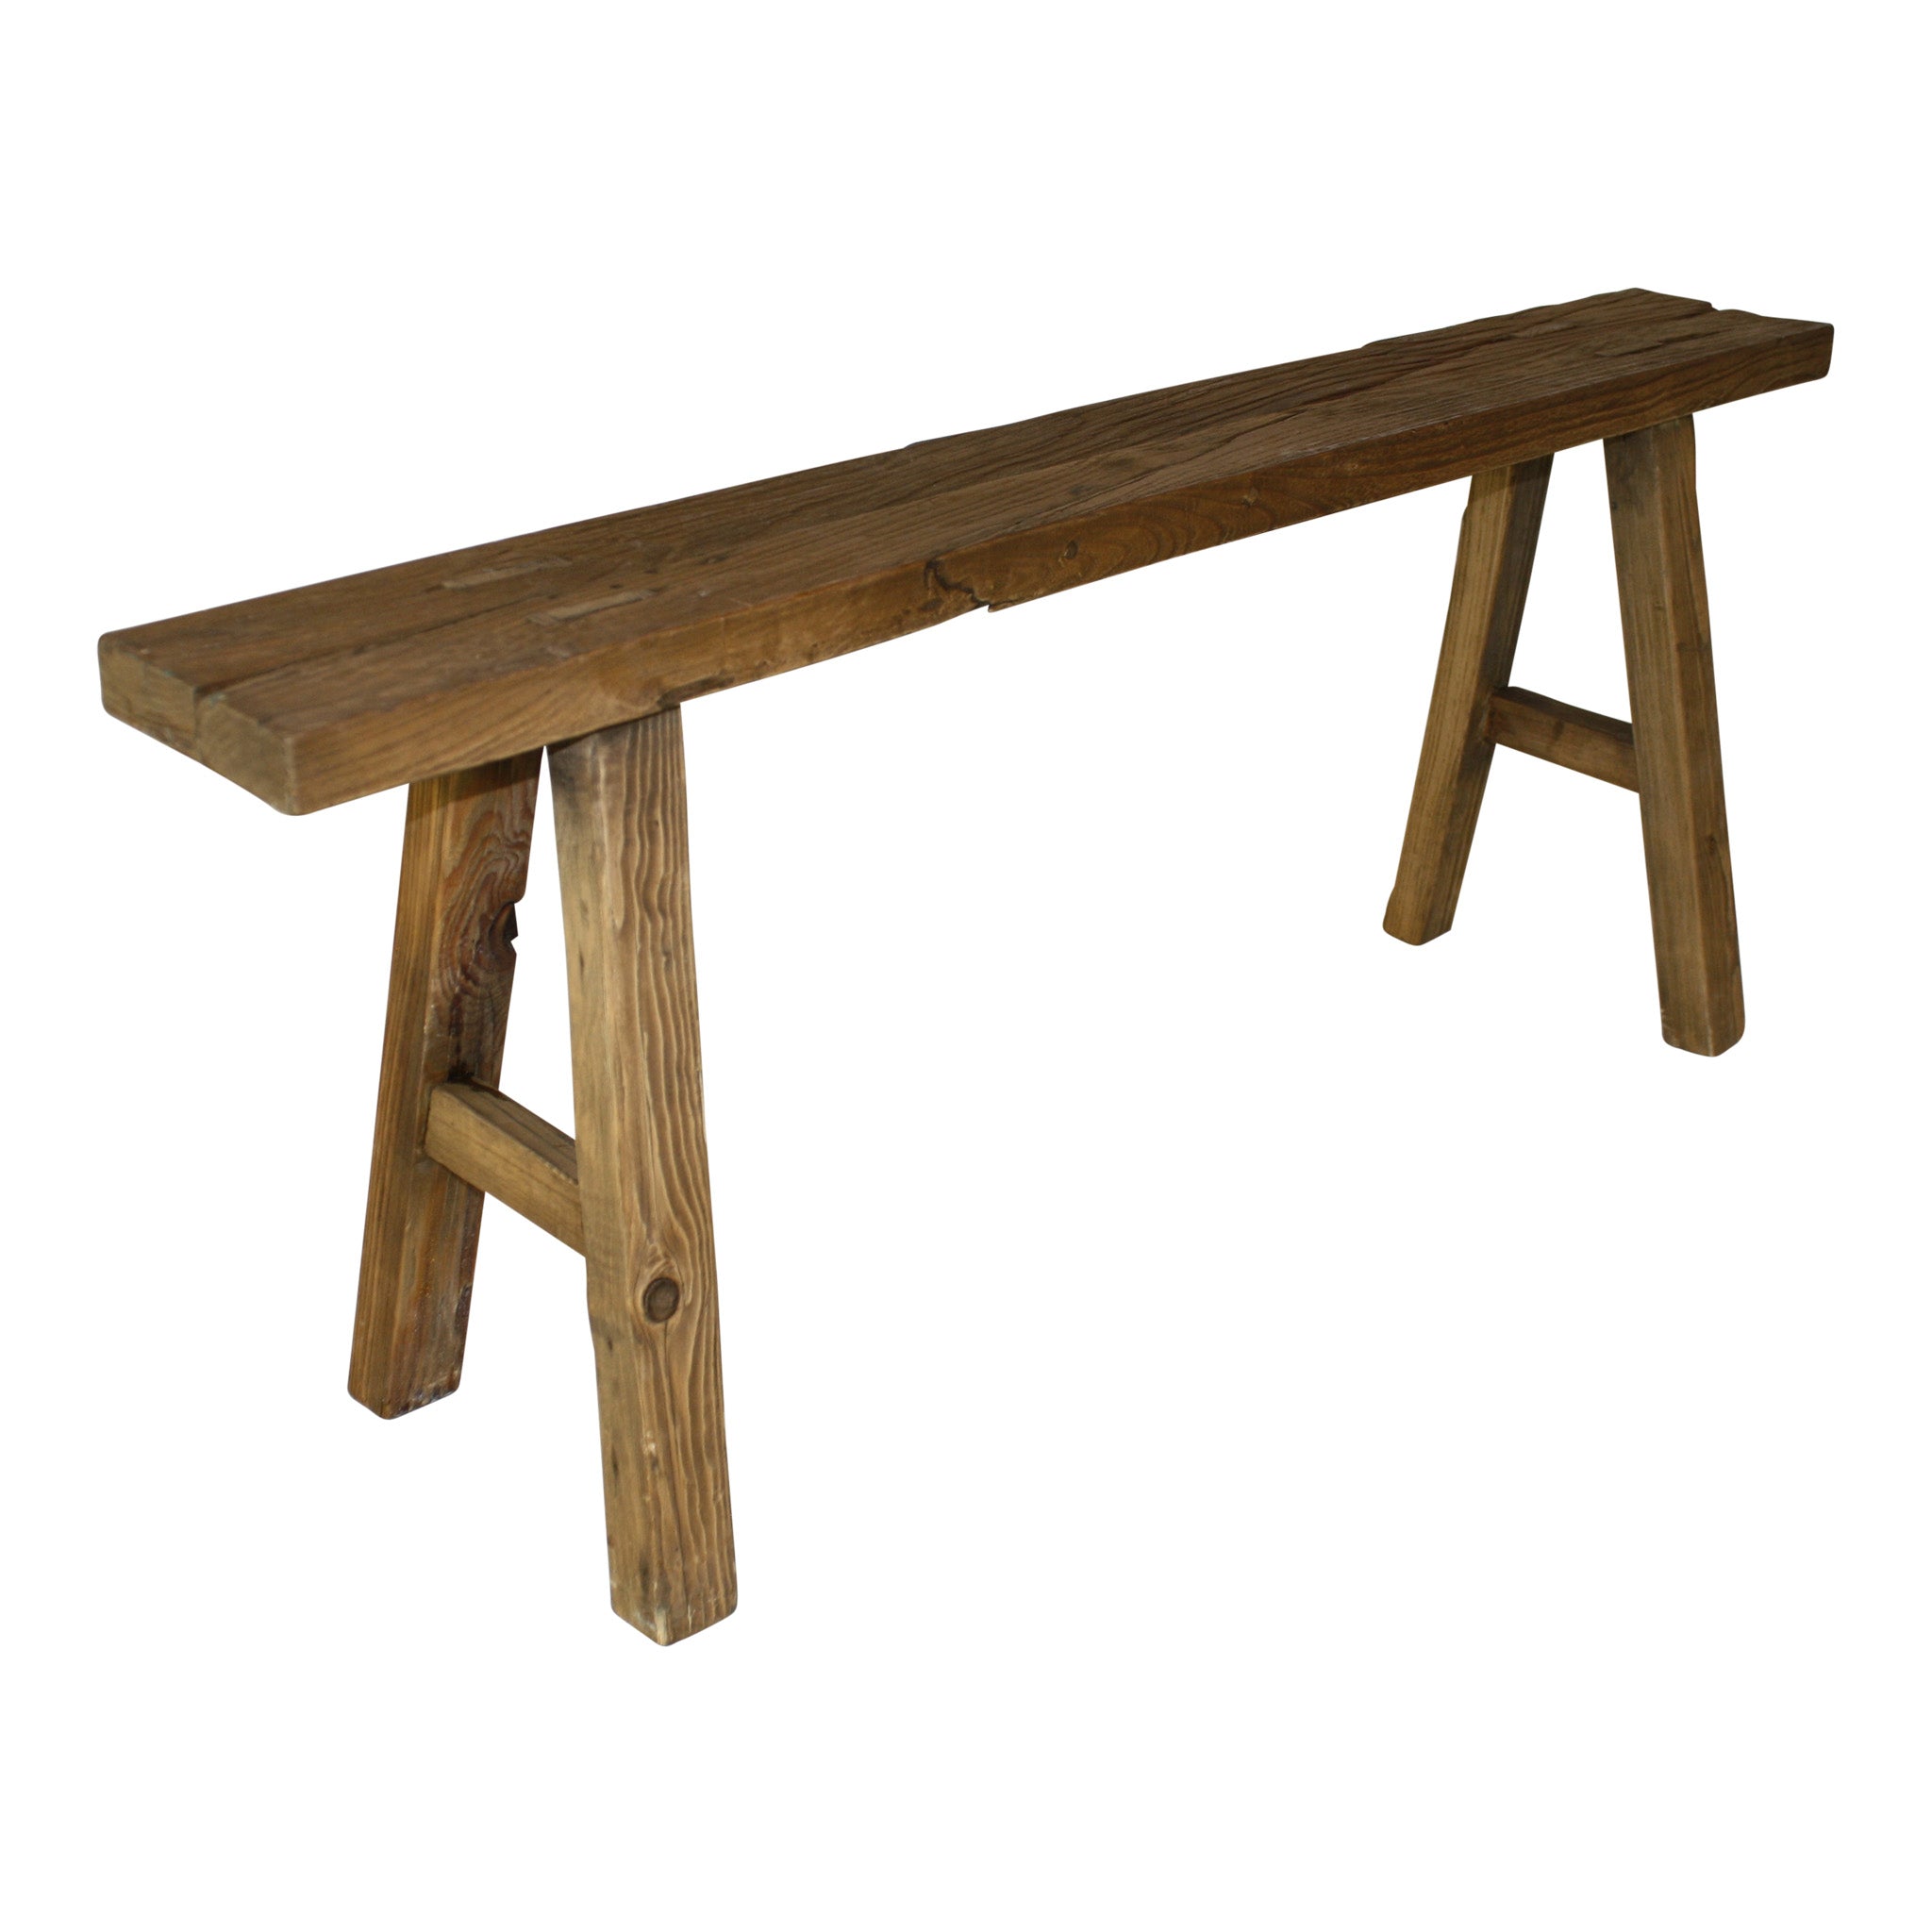 Small Mortise and Tenon Joint Oak Farm Bench